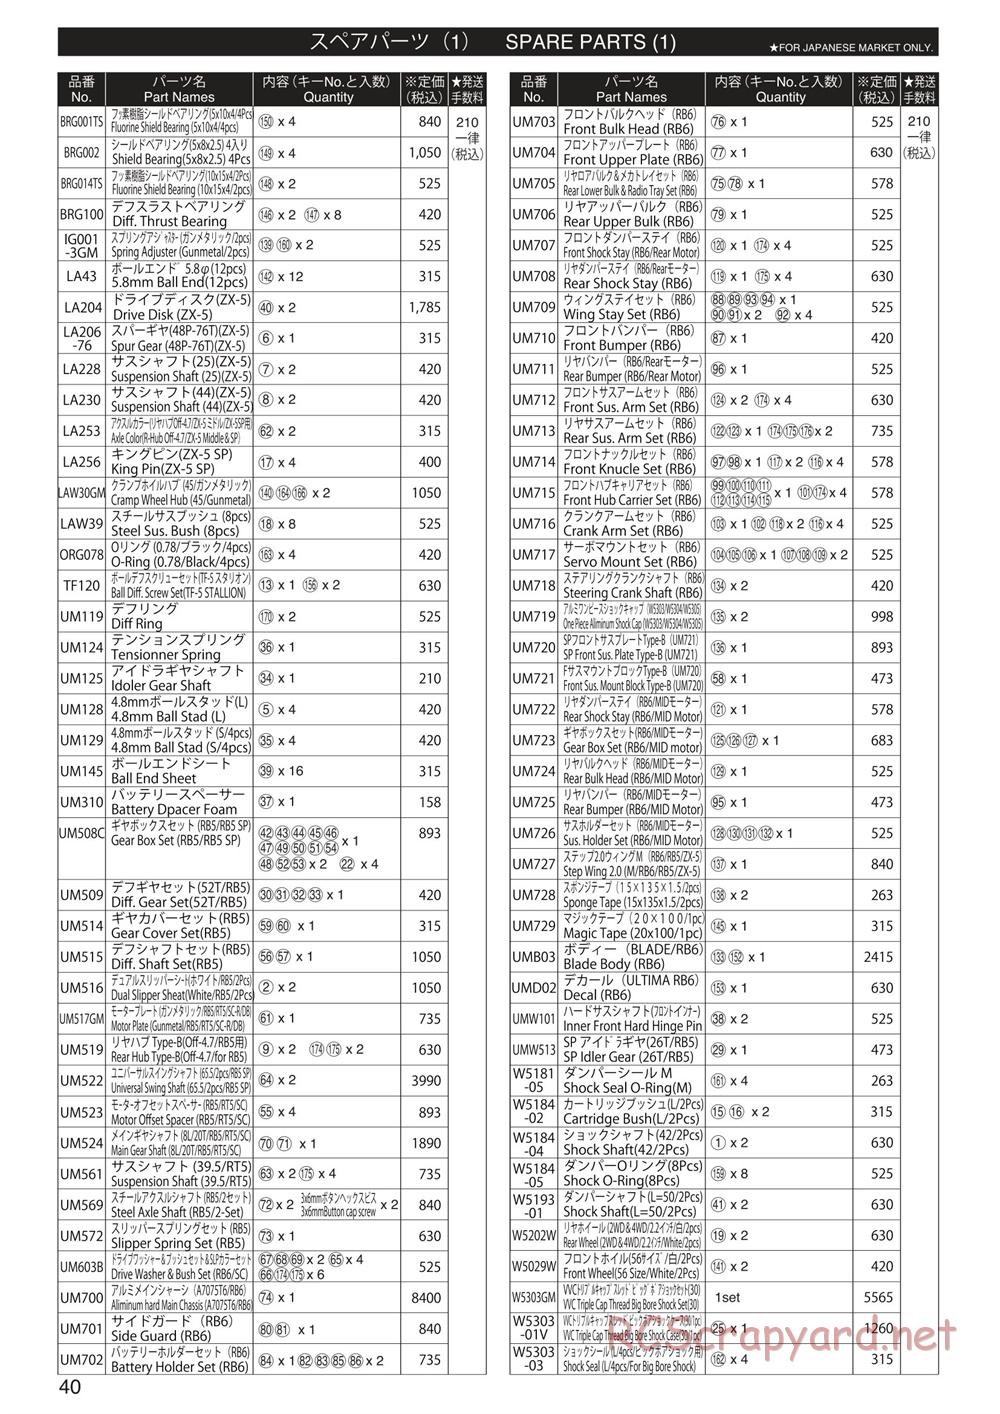 Kyosho - Ultima RB6 - Parts List - Page 1